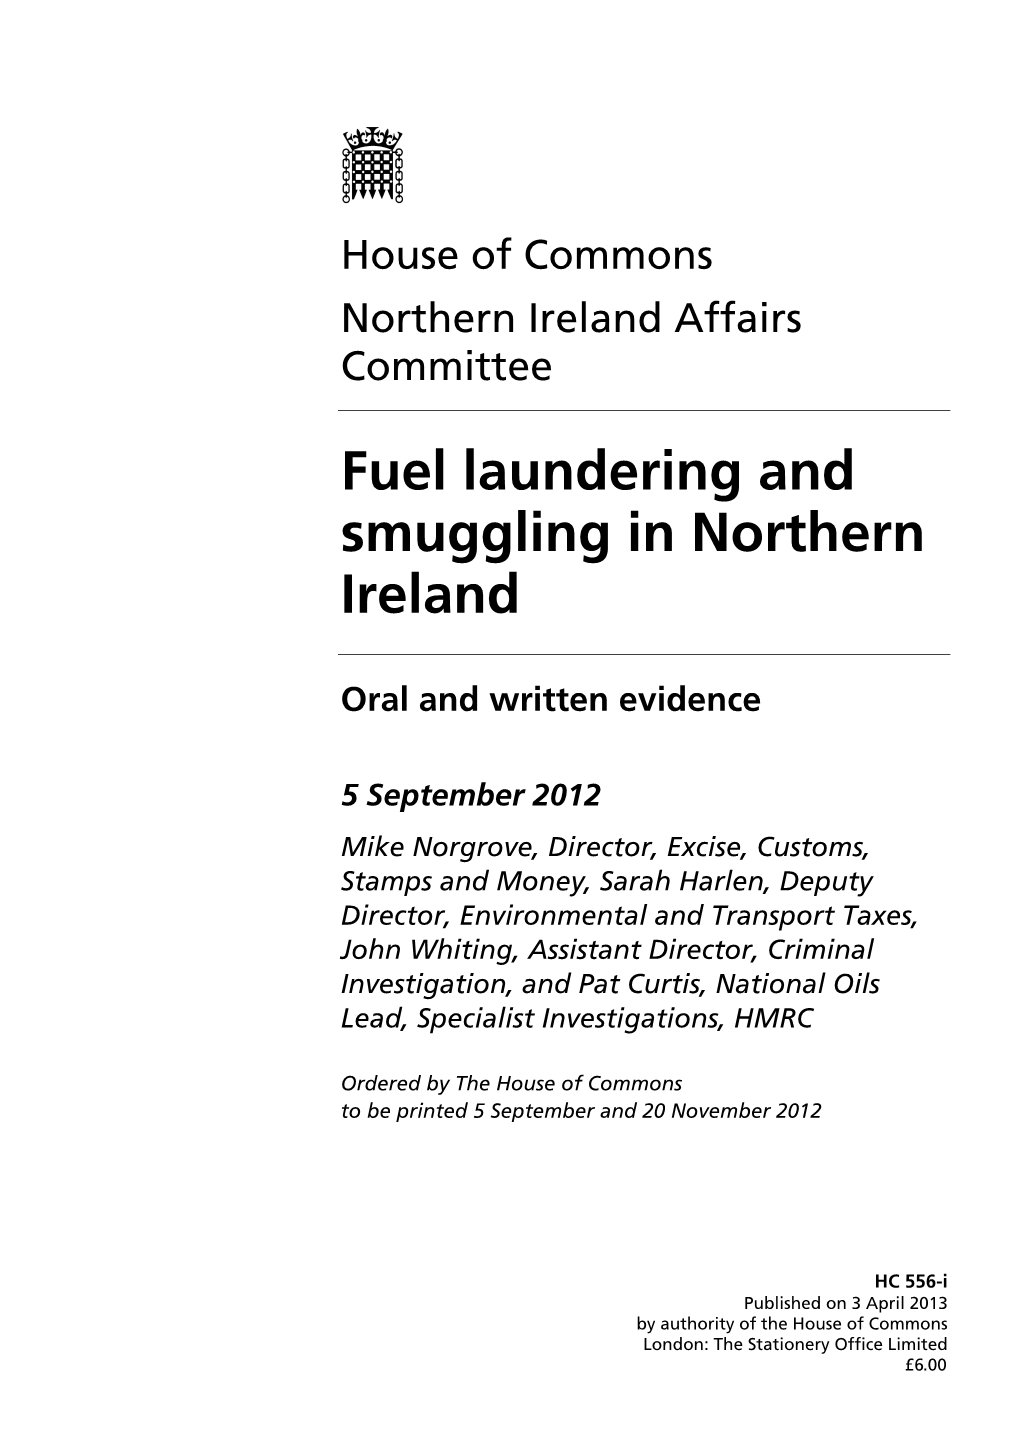 Fuel Laundering and Smuggling in Northern Ireland